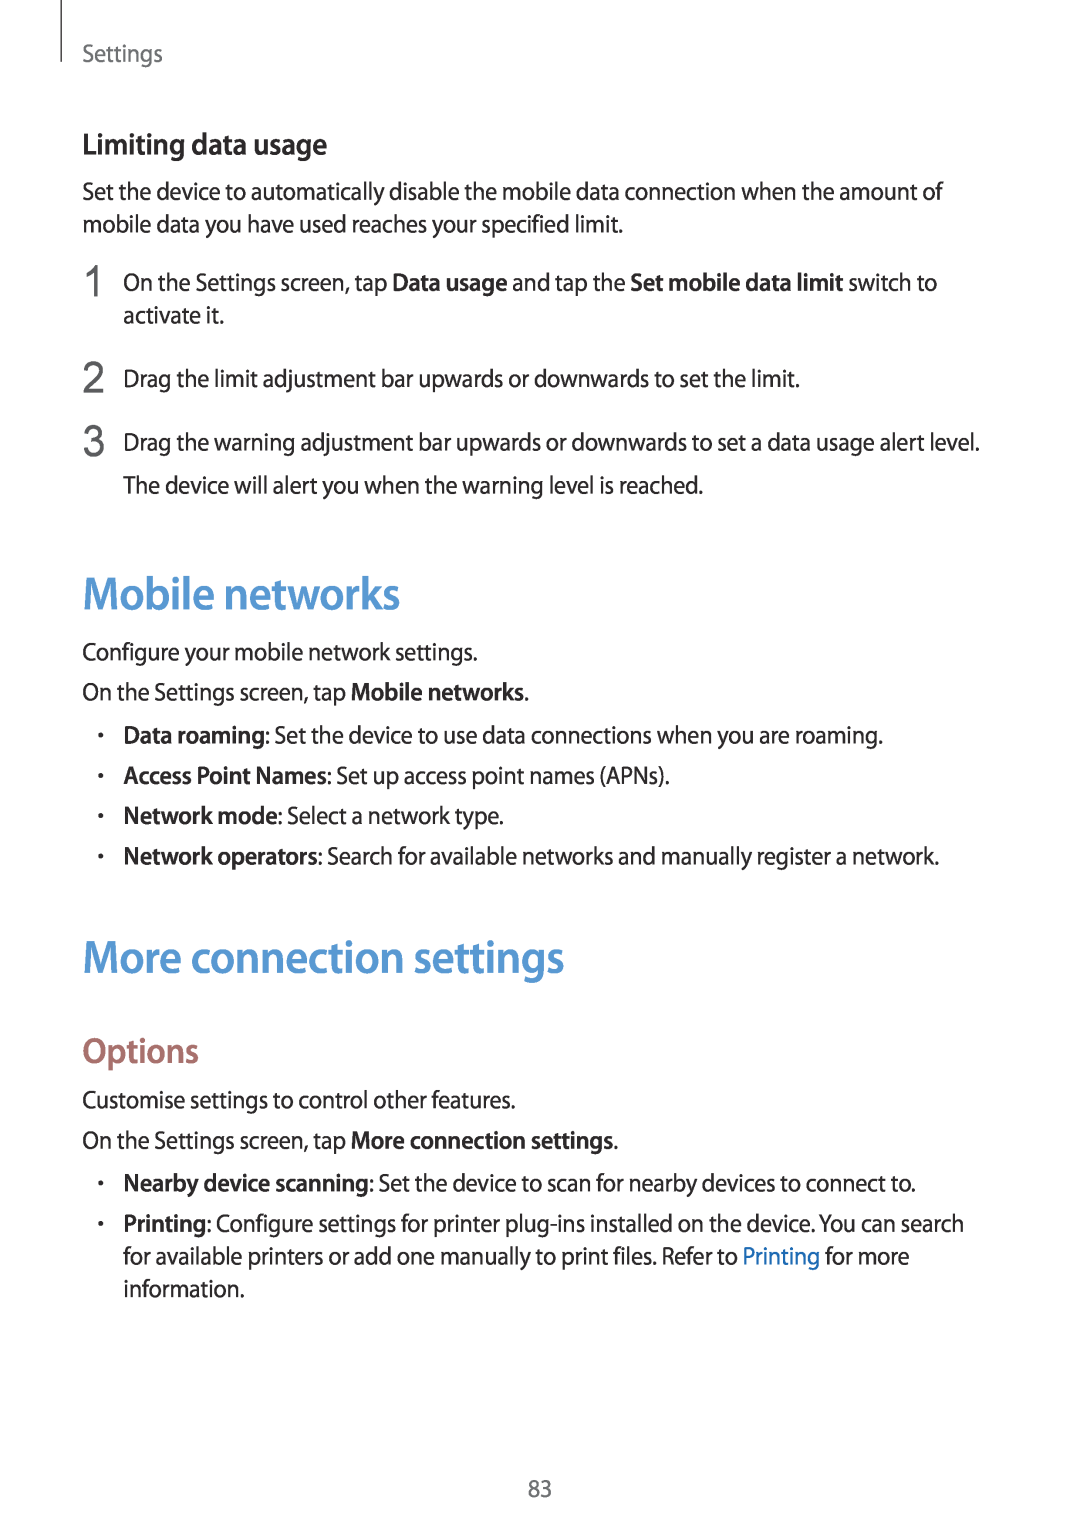 Samsung SM-T819NZWESEB, SM-T819NZKEDBT Mobile networks, More connection settings, Options, Limiting data usage, Settings 